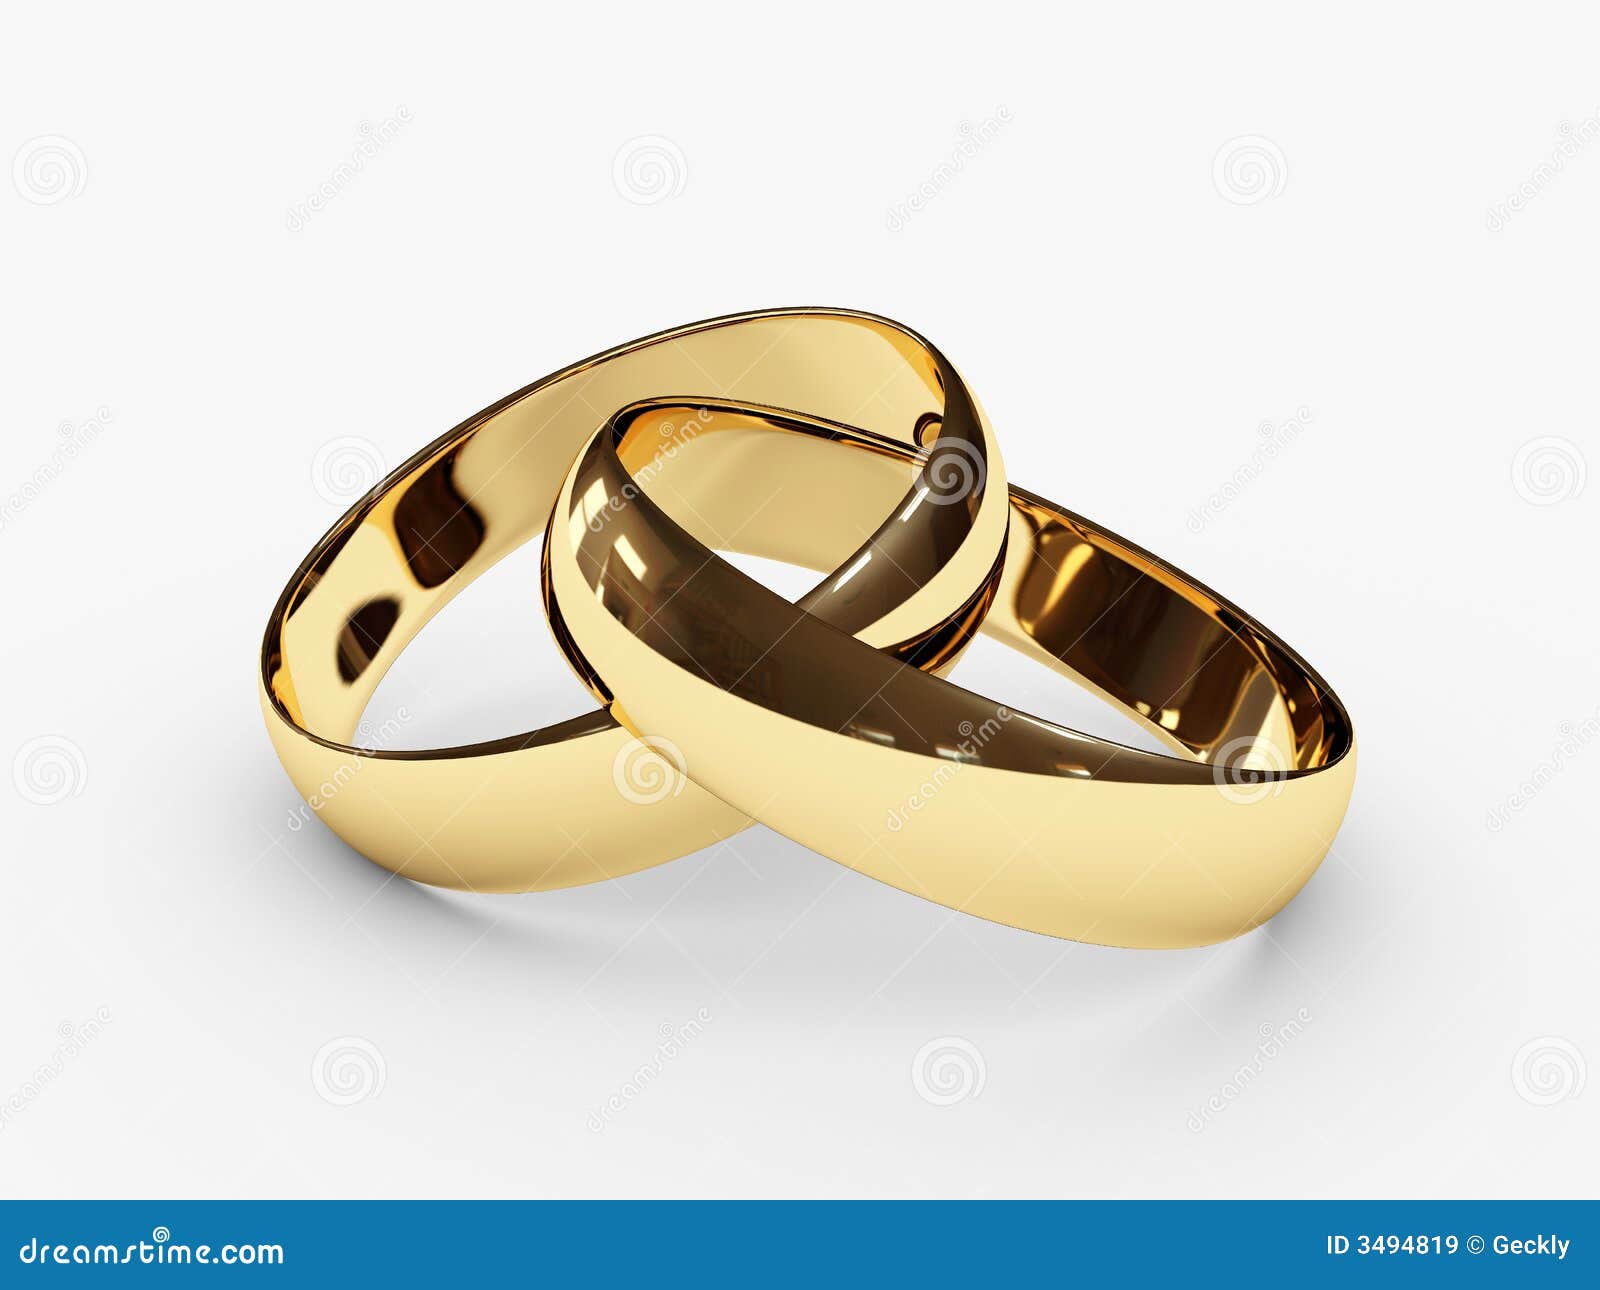 Royalty Free Stock Images: Connected wedding rings